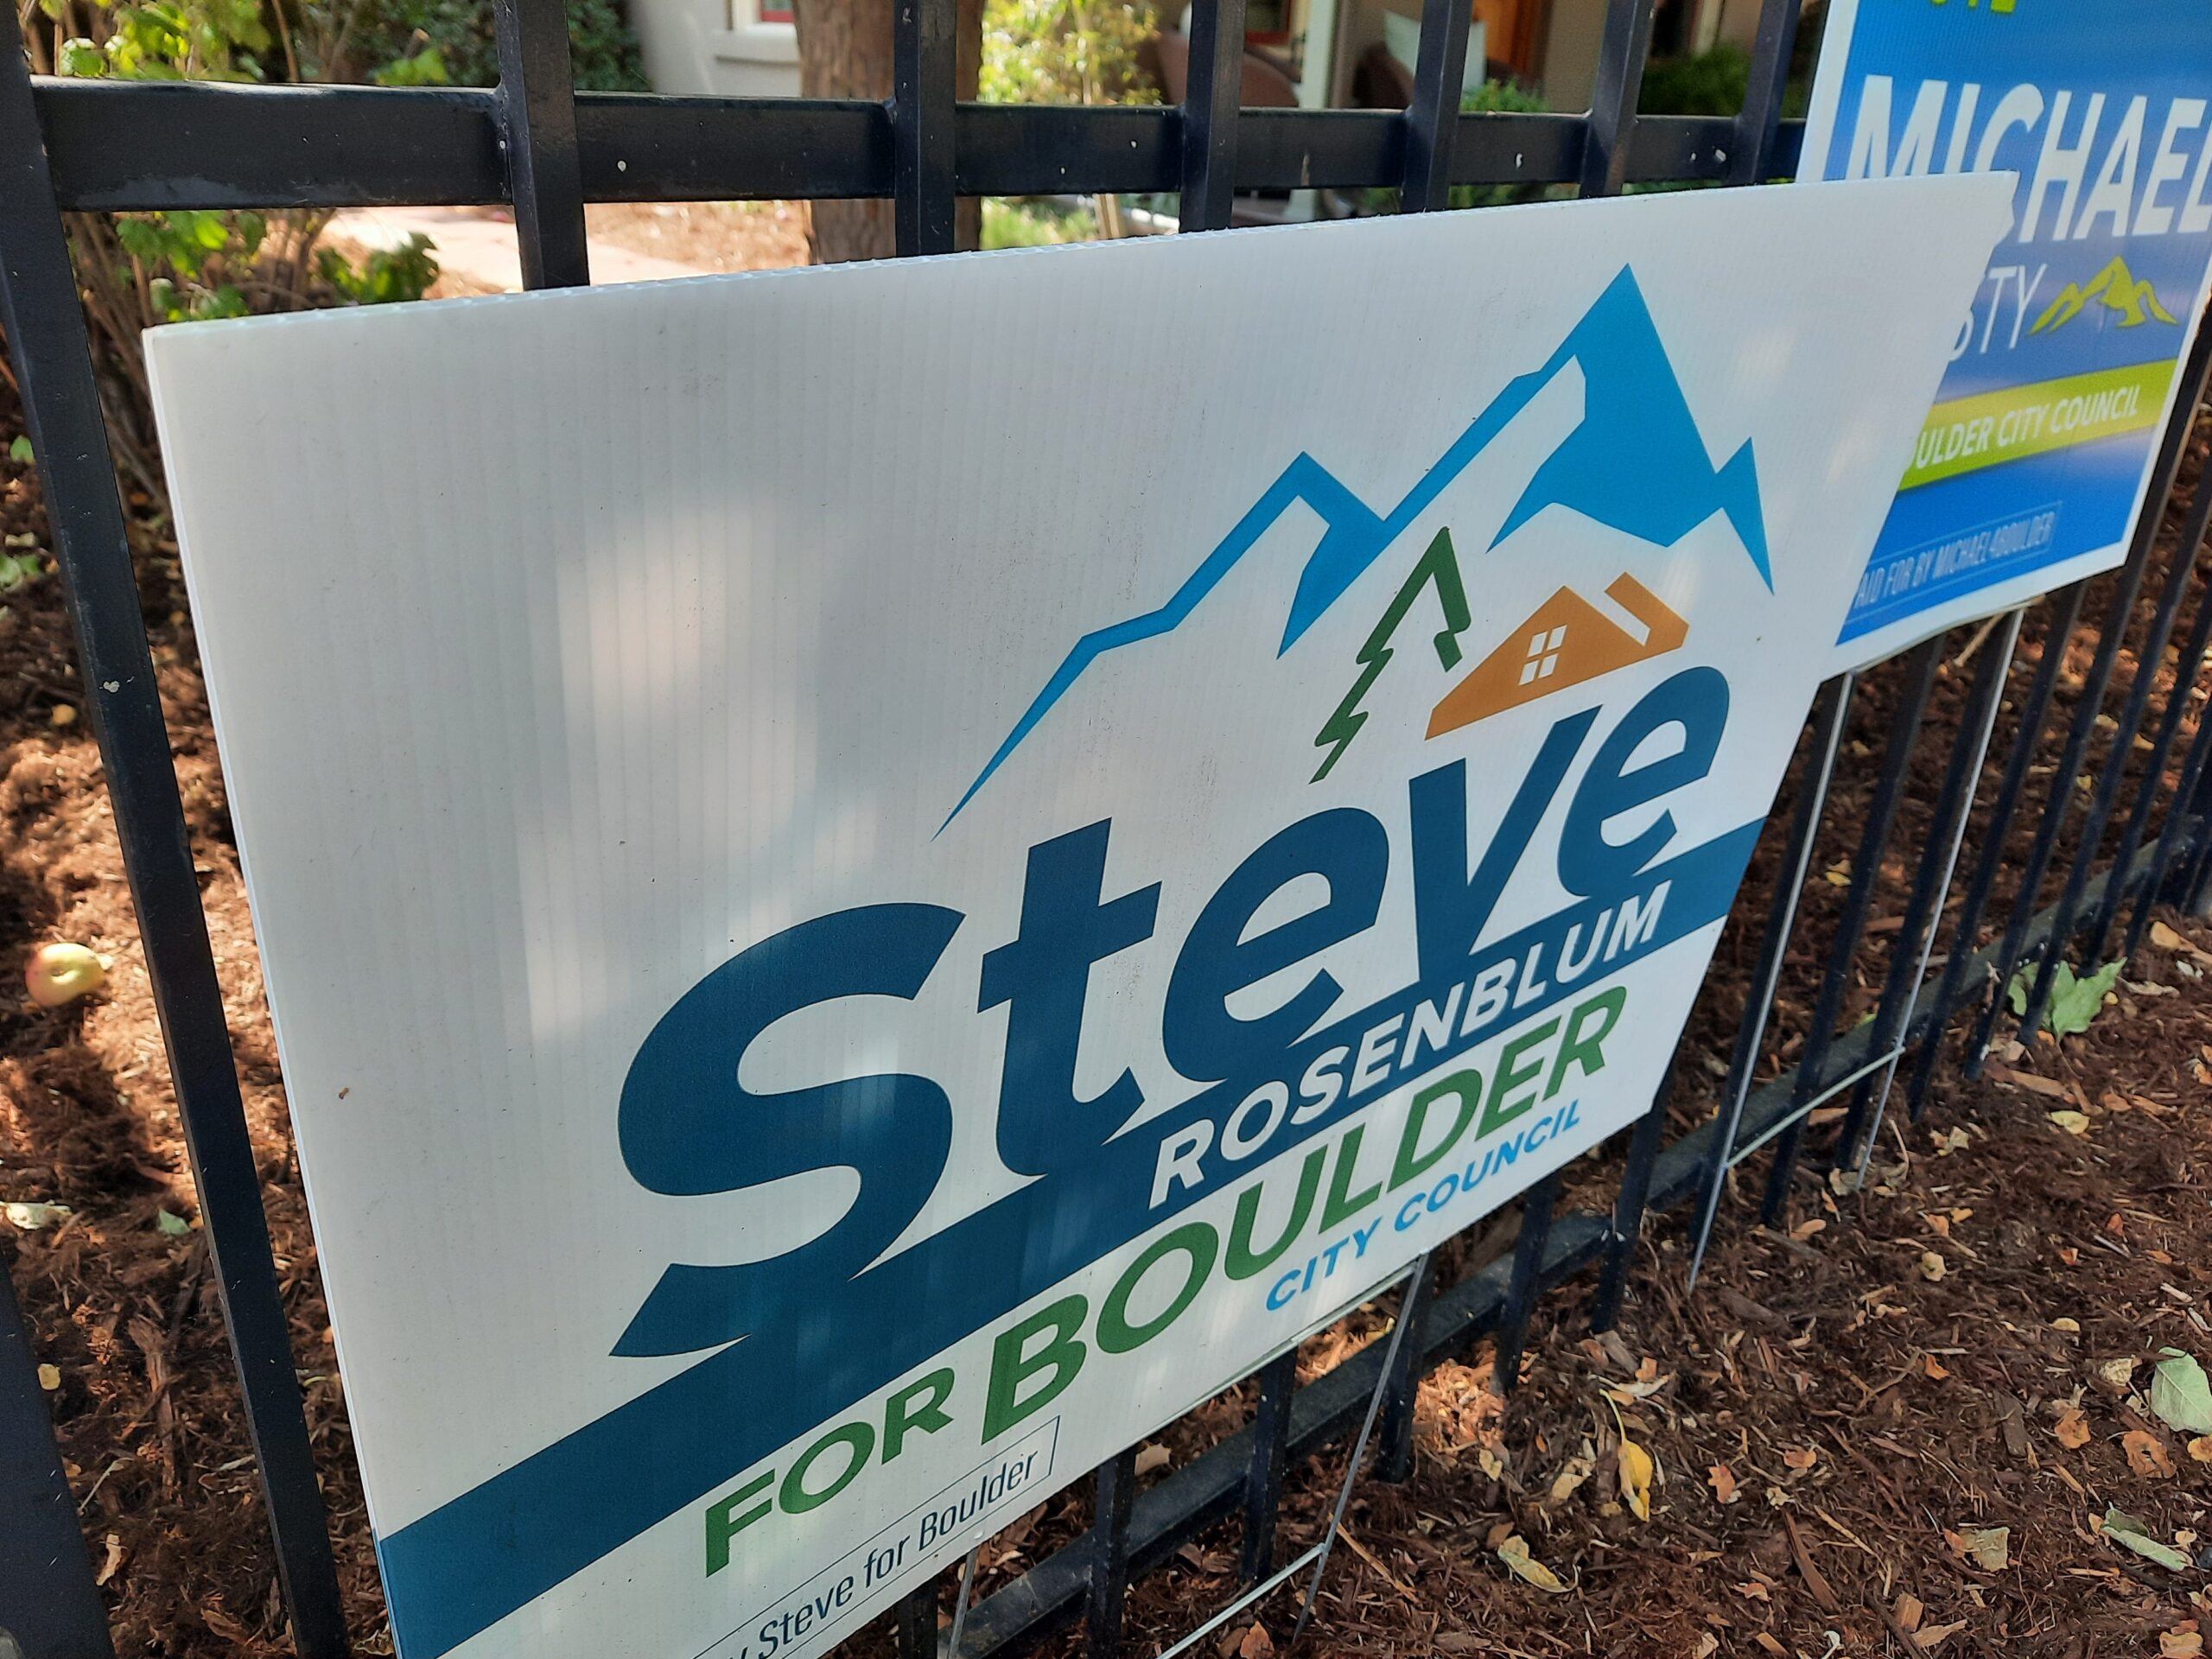 Steve Rosenblum wants to move past Boulder’s baggage. Can he overcome his own?